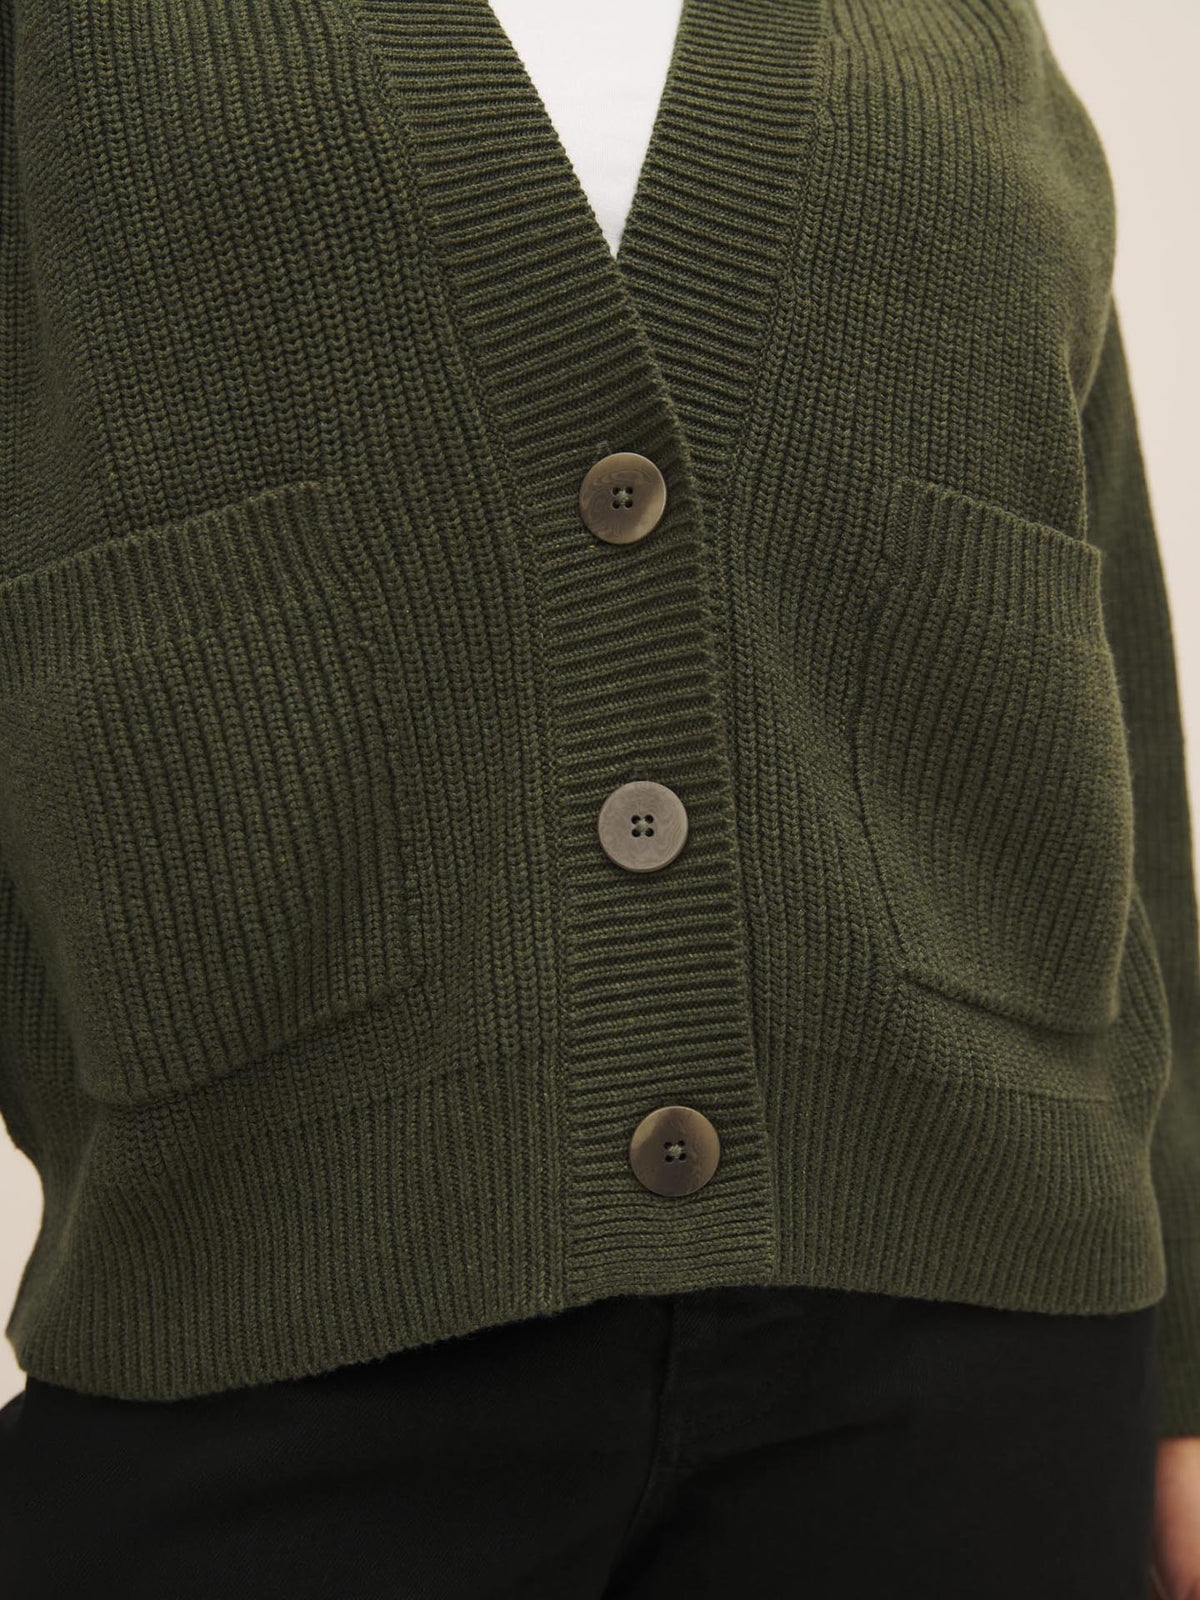 Close-up of a green Hannes Cardigan – Khaki Marle with three brown buttons by Kowtow.